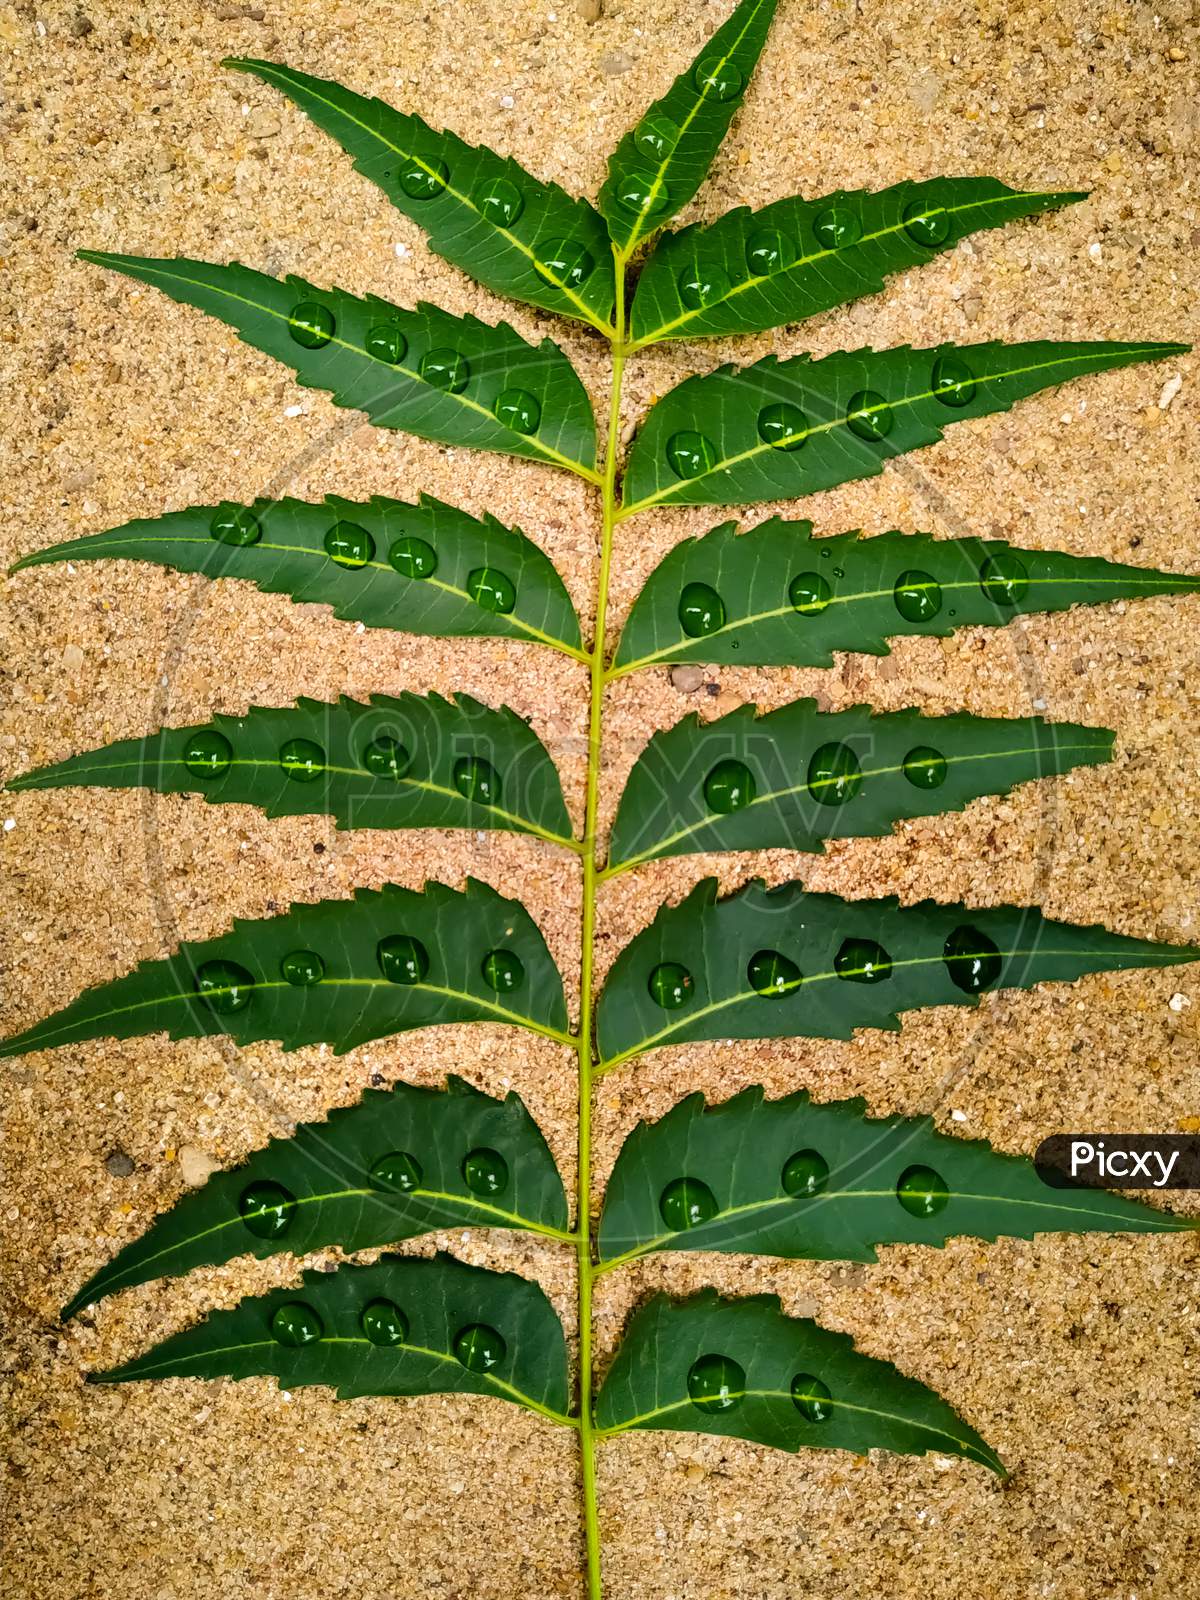 Green Neem Leaves Water Drops On The Ground